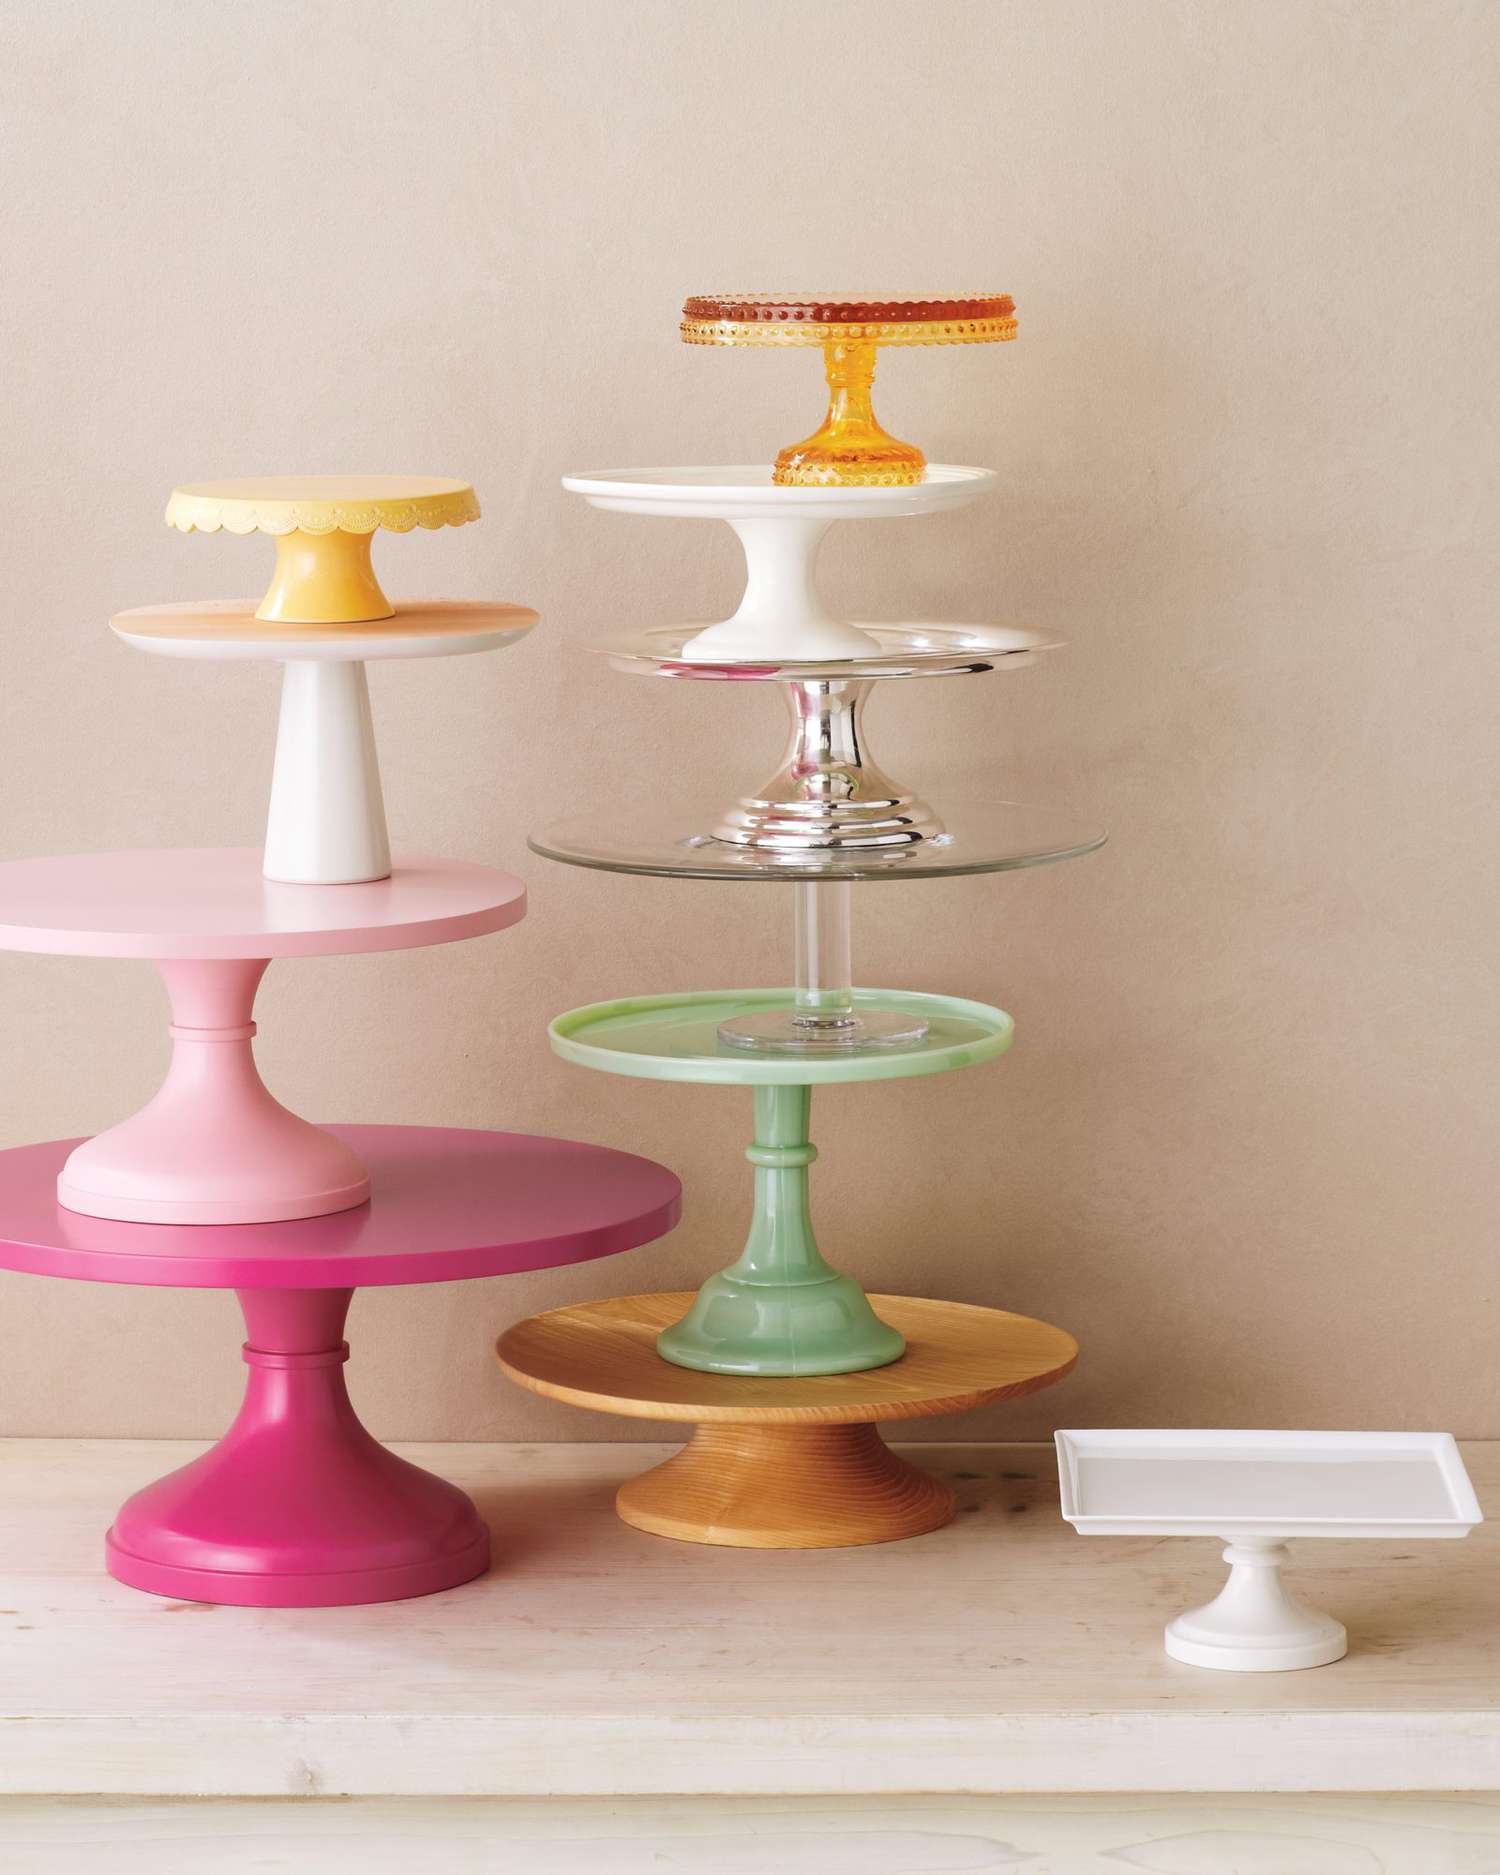 Cake Stand for birthday parties gift for her Ships next day Wedding cake stand 12\u2019\u2019 Square Yellow Bone Inlay Cake Stand Cake Holder